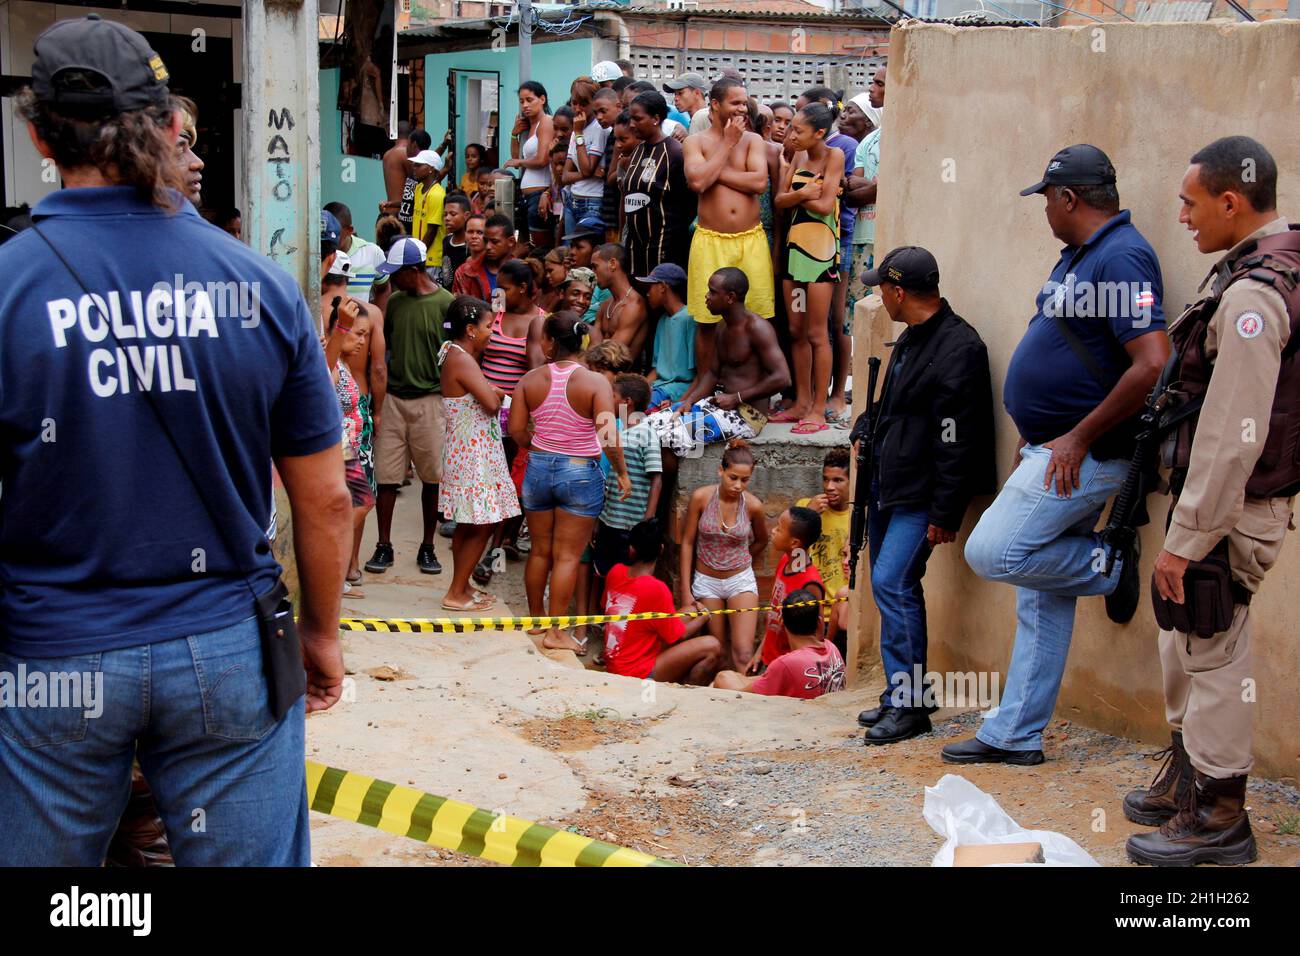 salvador, bahia / brazil - january 22, 2013: Civil police investigates the body of a murdered man in the Sussuarana neighborhood in the city of Salvad Stock Photo